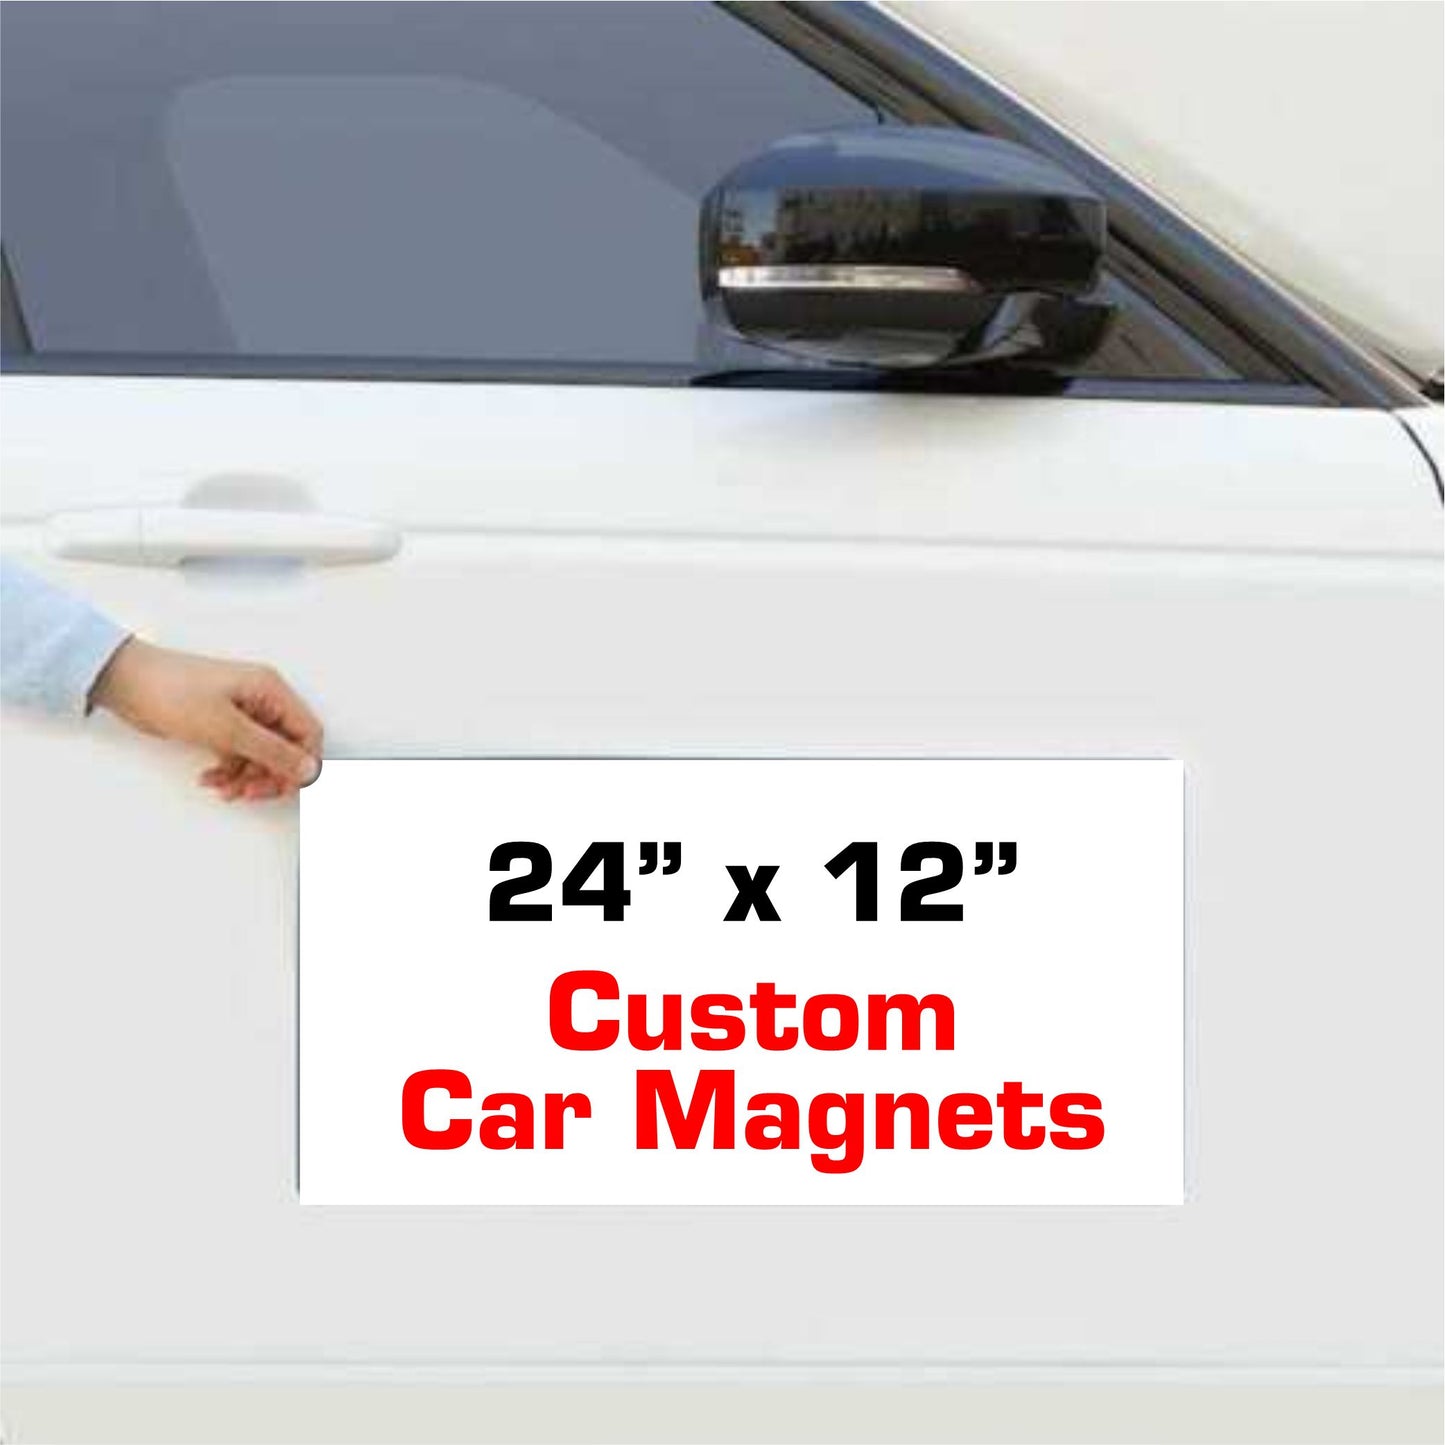 Custom Vehicle Magnets Auto Truck Van Car Signs Commercial Signage Vehicle Business Accessories